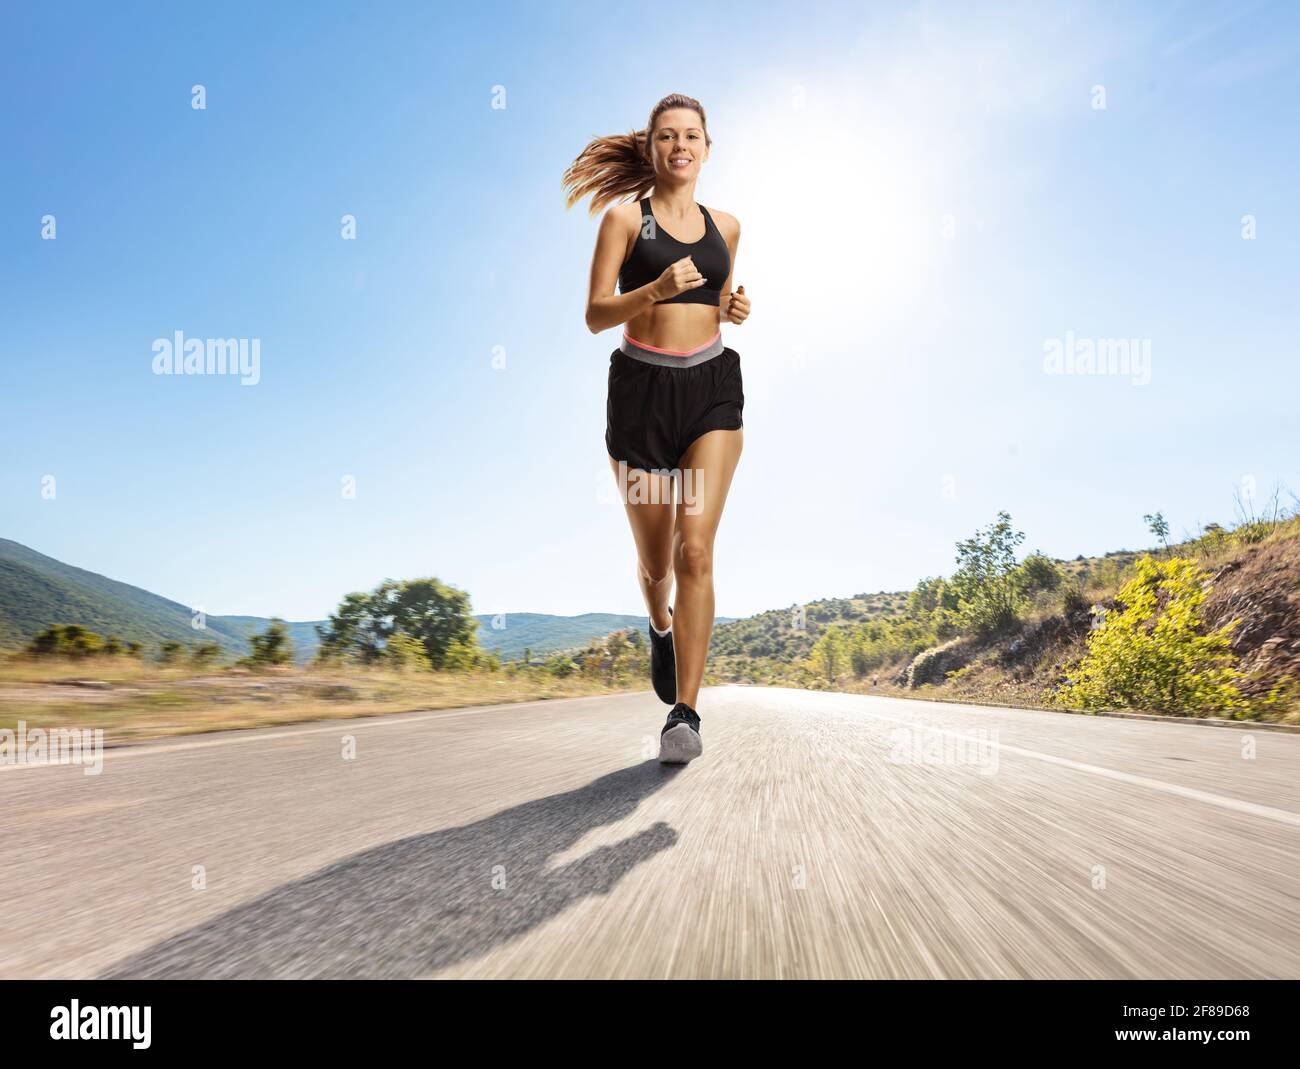 Full length portrait of a young woman jogging on a road towards the camera Stock Photo